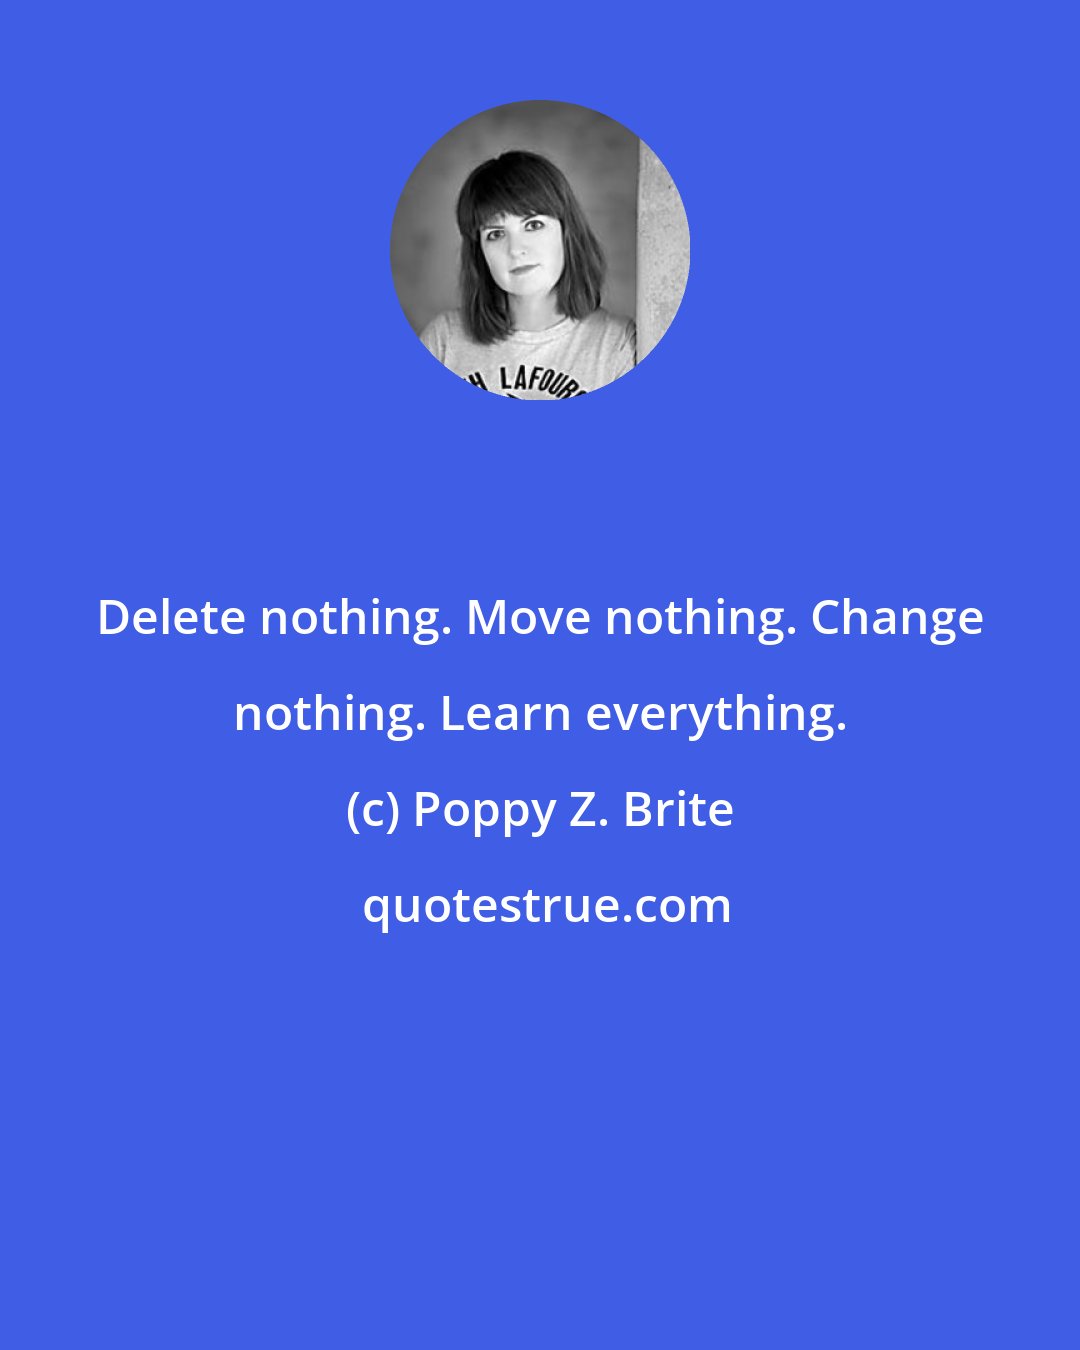 Poppy Z. Brite: Delete nothing. Move nothing. Change nothing. Learn everything.